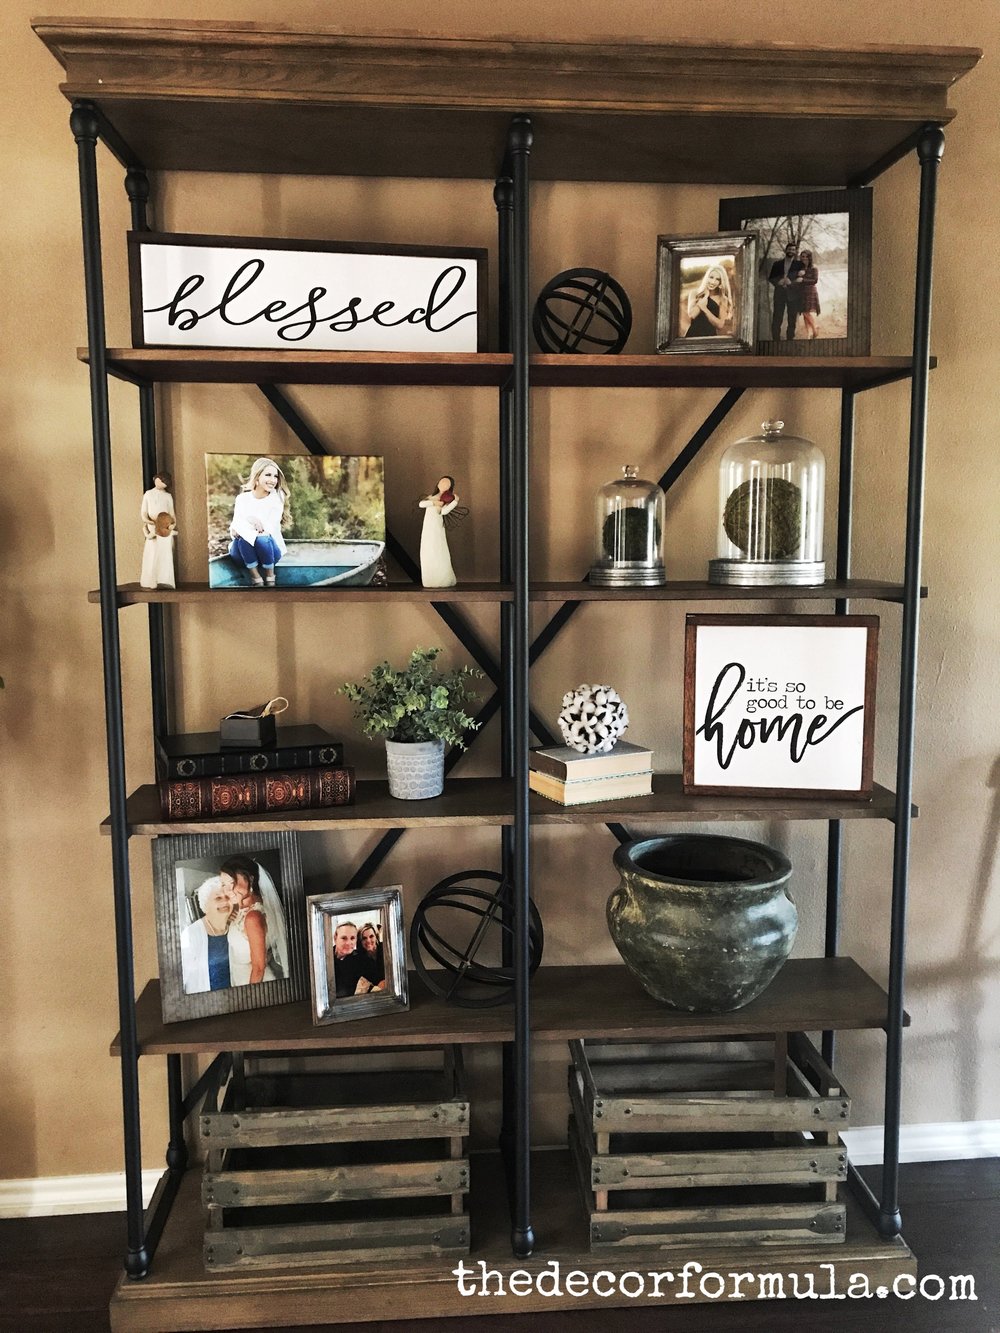 How To Decorate Display Shelves The, How To Decorate Shelves